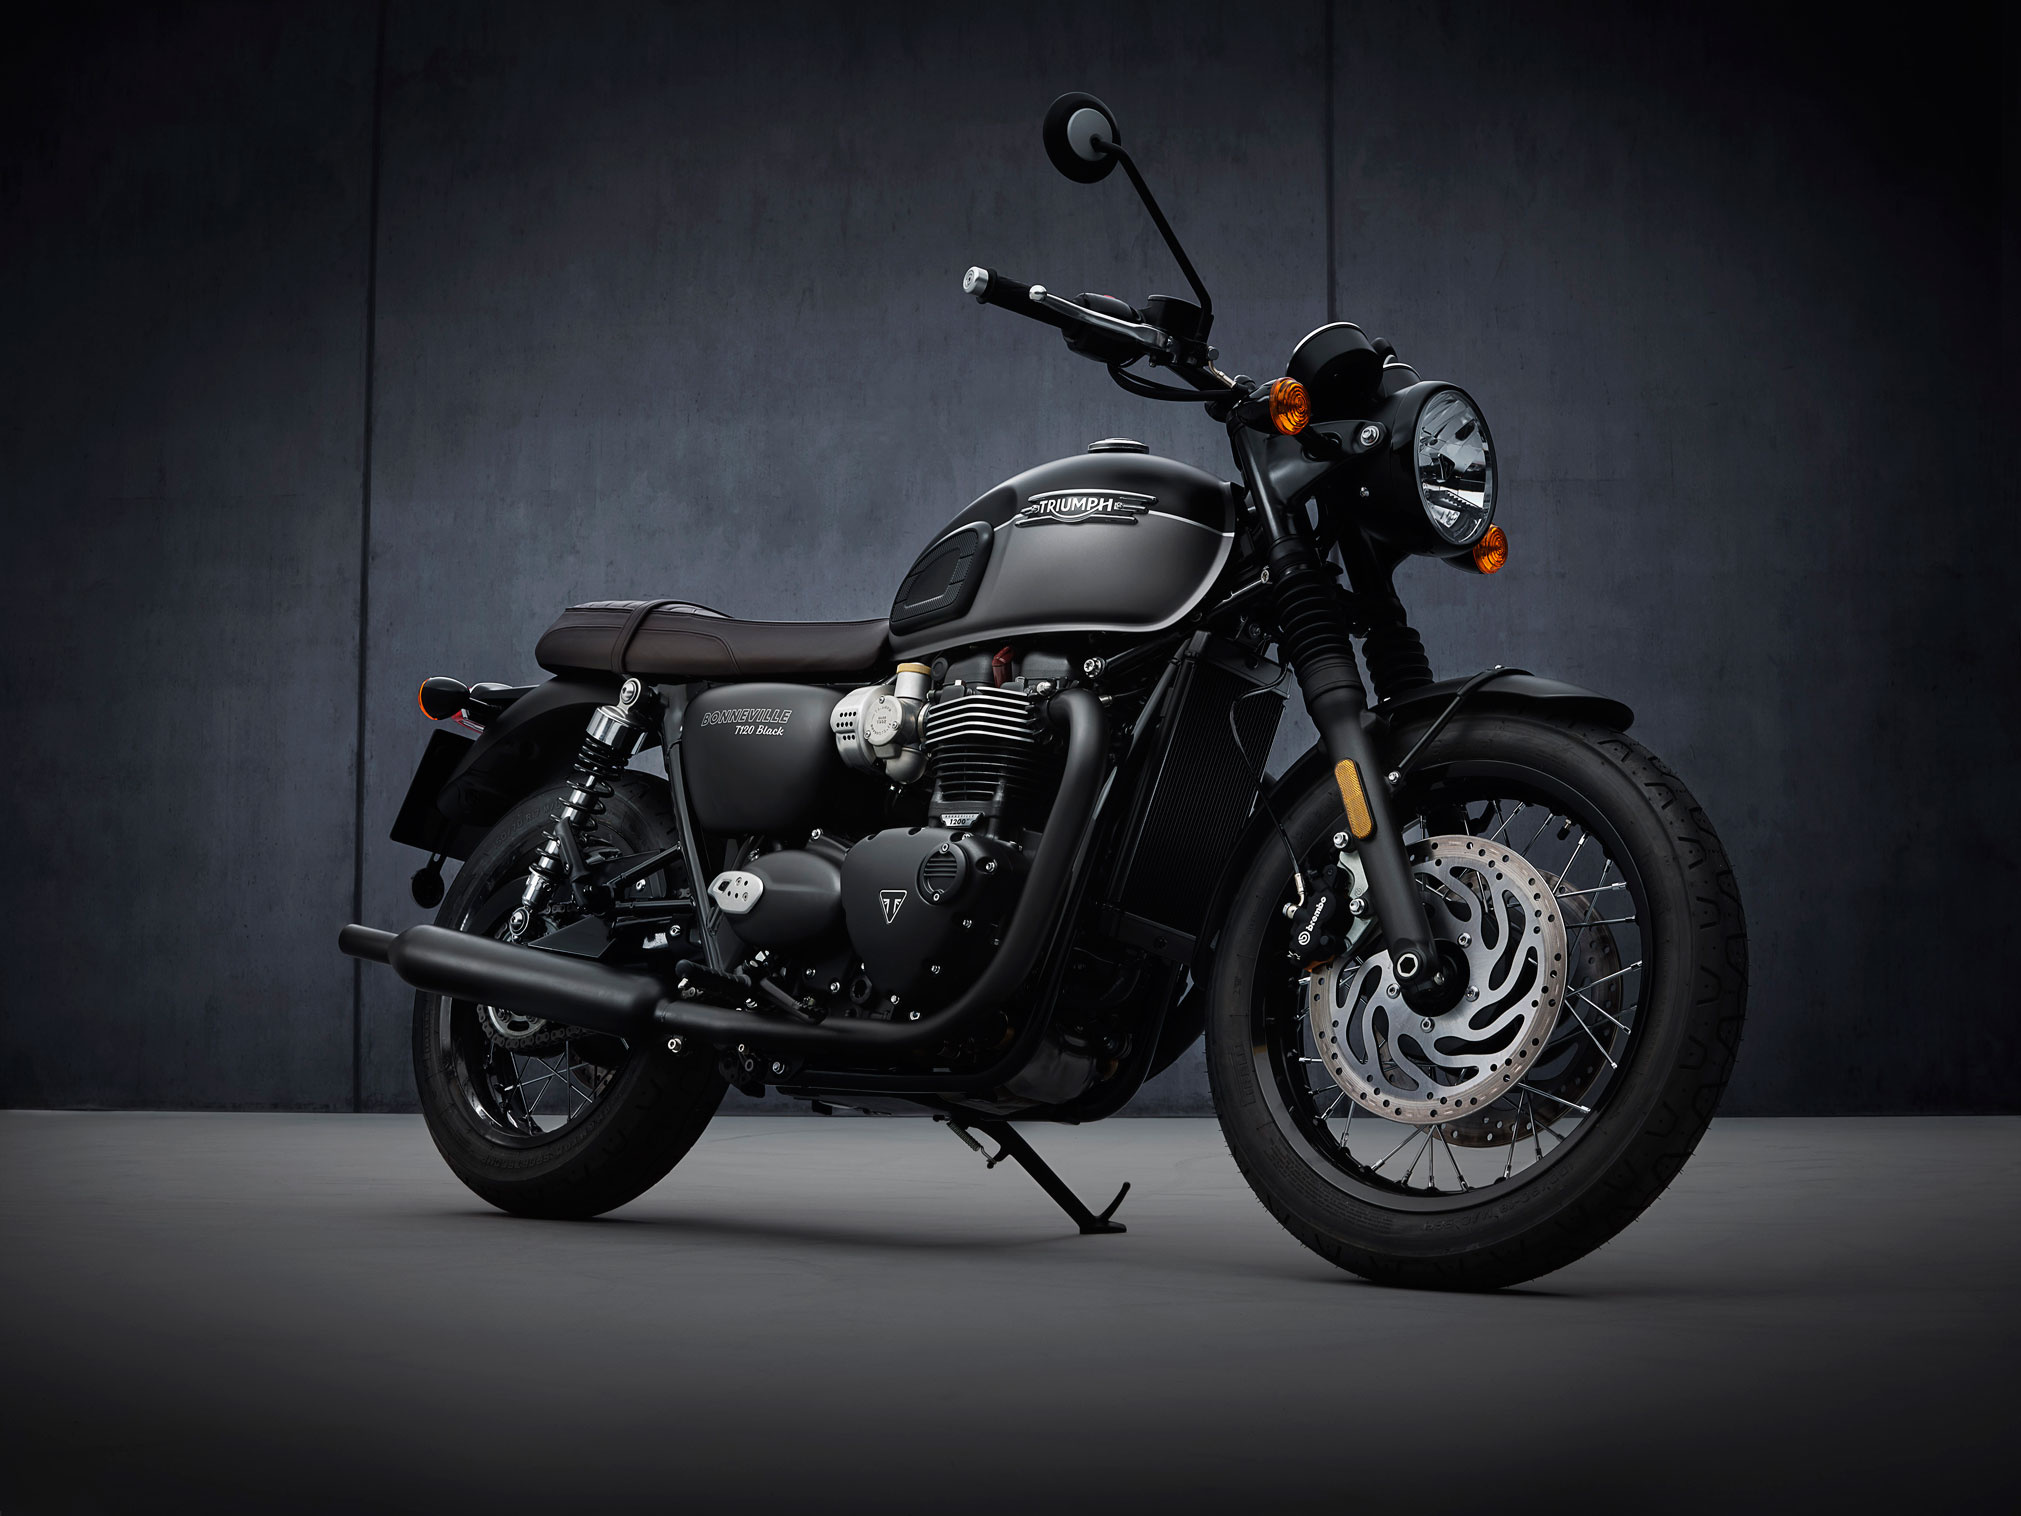 2021 Triumph Bonneville T120 Black, Ultimate guide and review, Sleek and powerful motorcycle, Total Motorcycle's insights, 2030x1520 HD Desktop